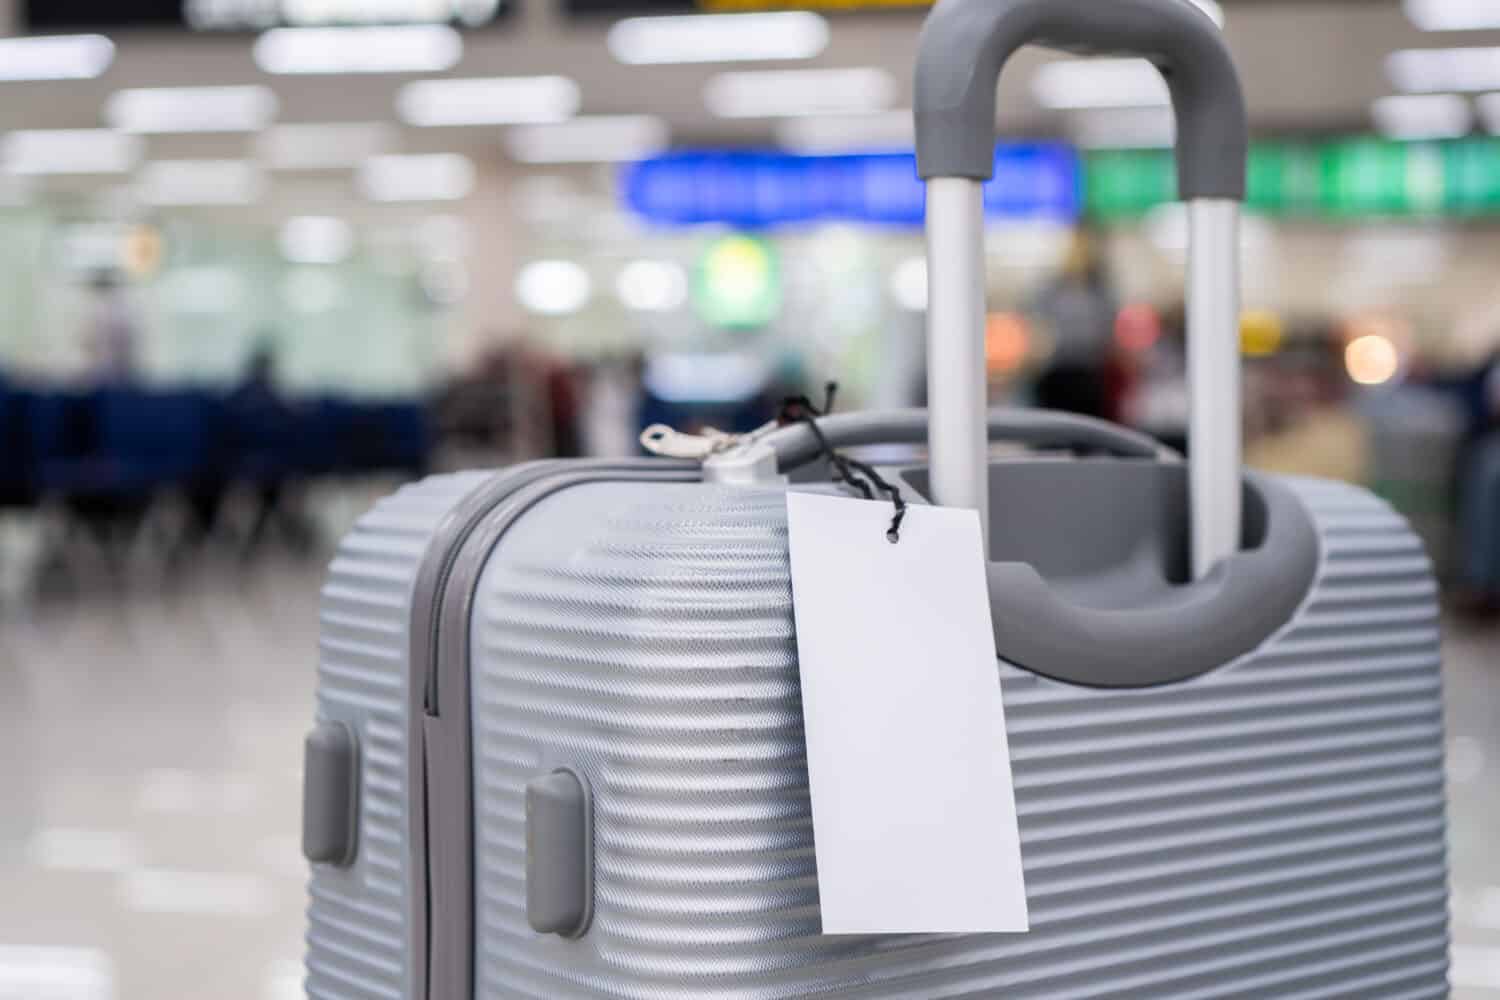 Luggage holder tag blank label on suitcase / baggage put letter "Travel insurance" word for display your products near combination locks for traveling luggages in airport terminal, copy space for text